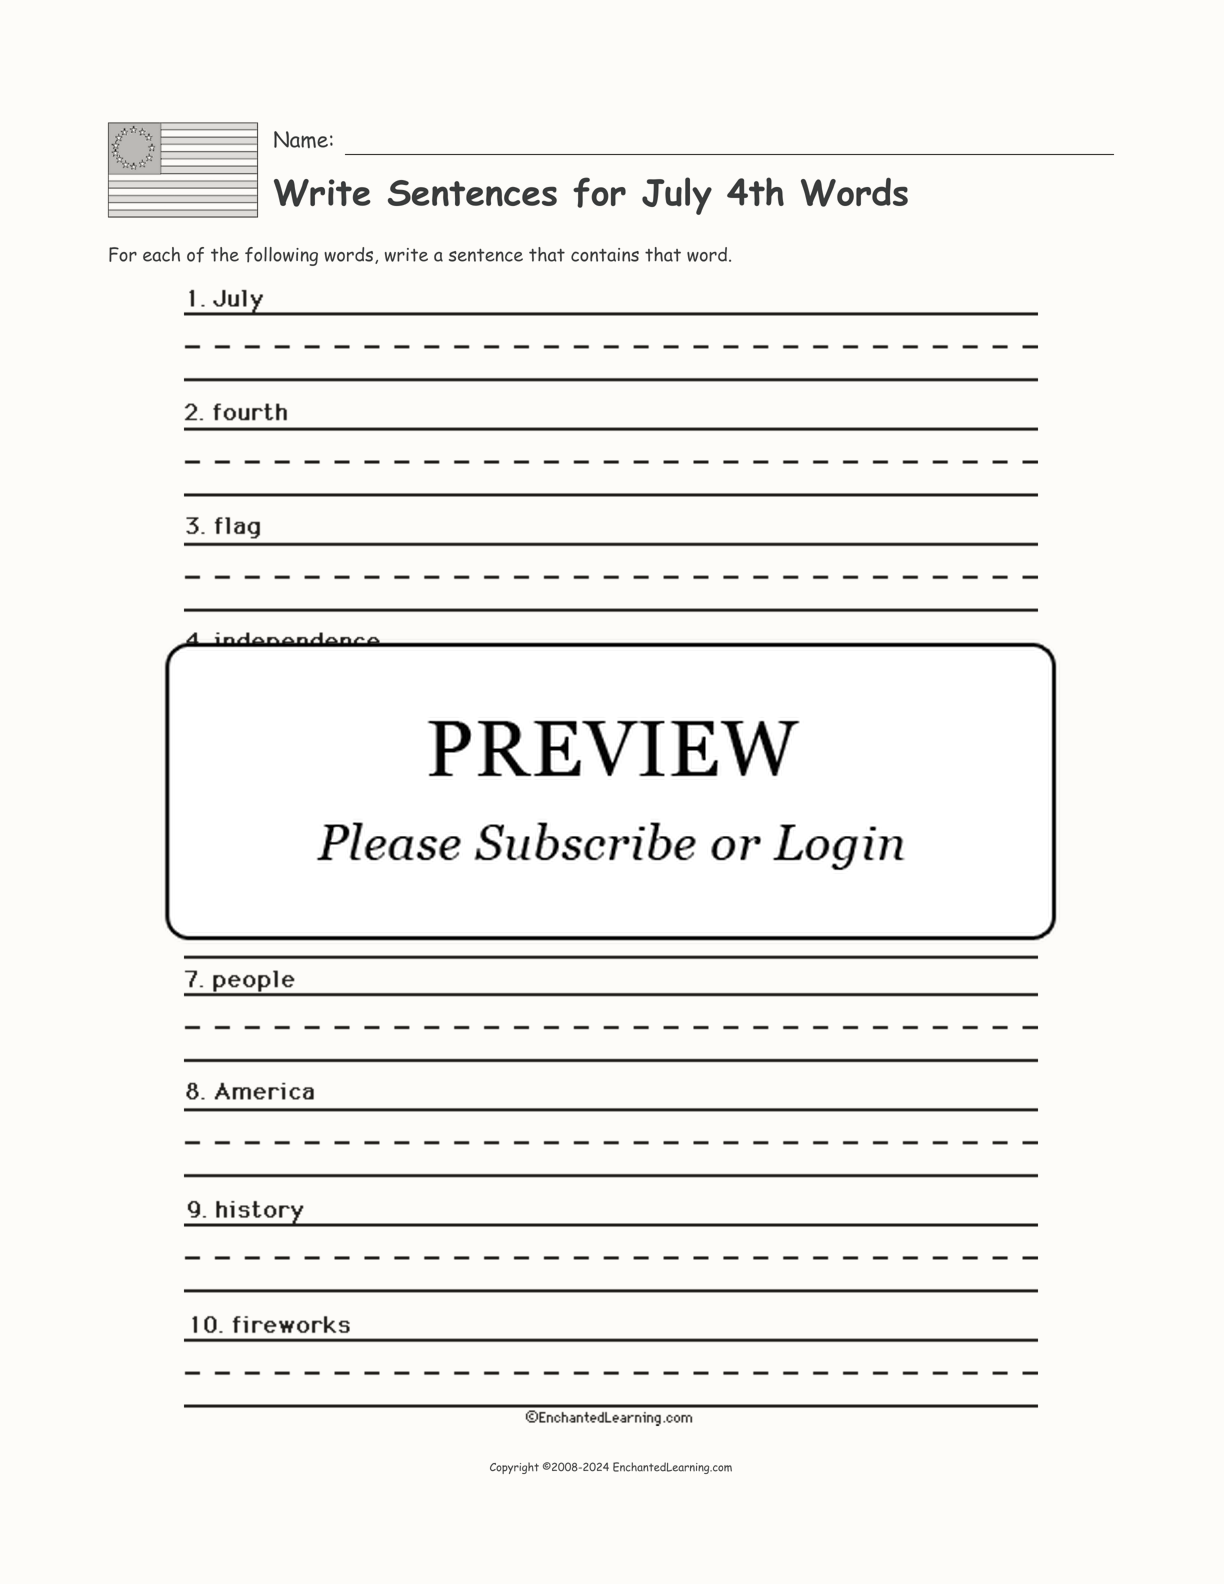 Write Sentences for July 4th Words interactive printout page 1